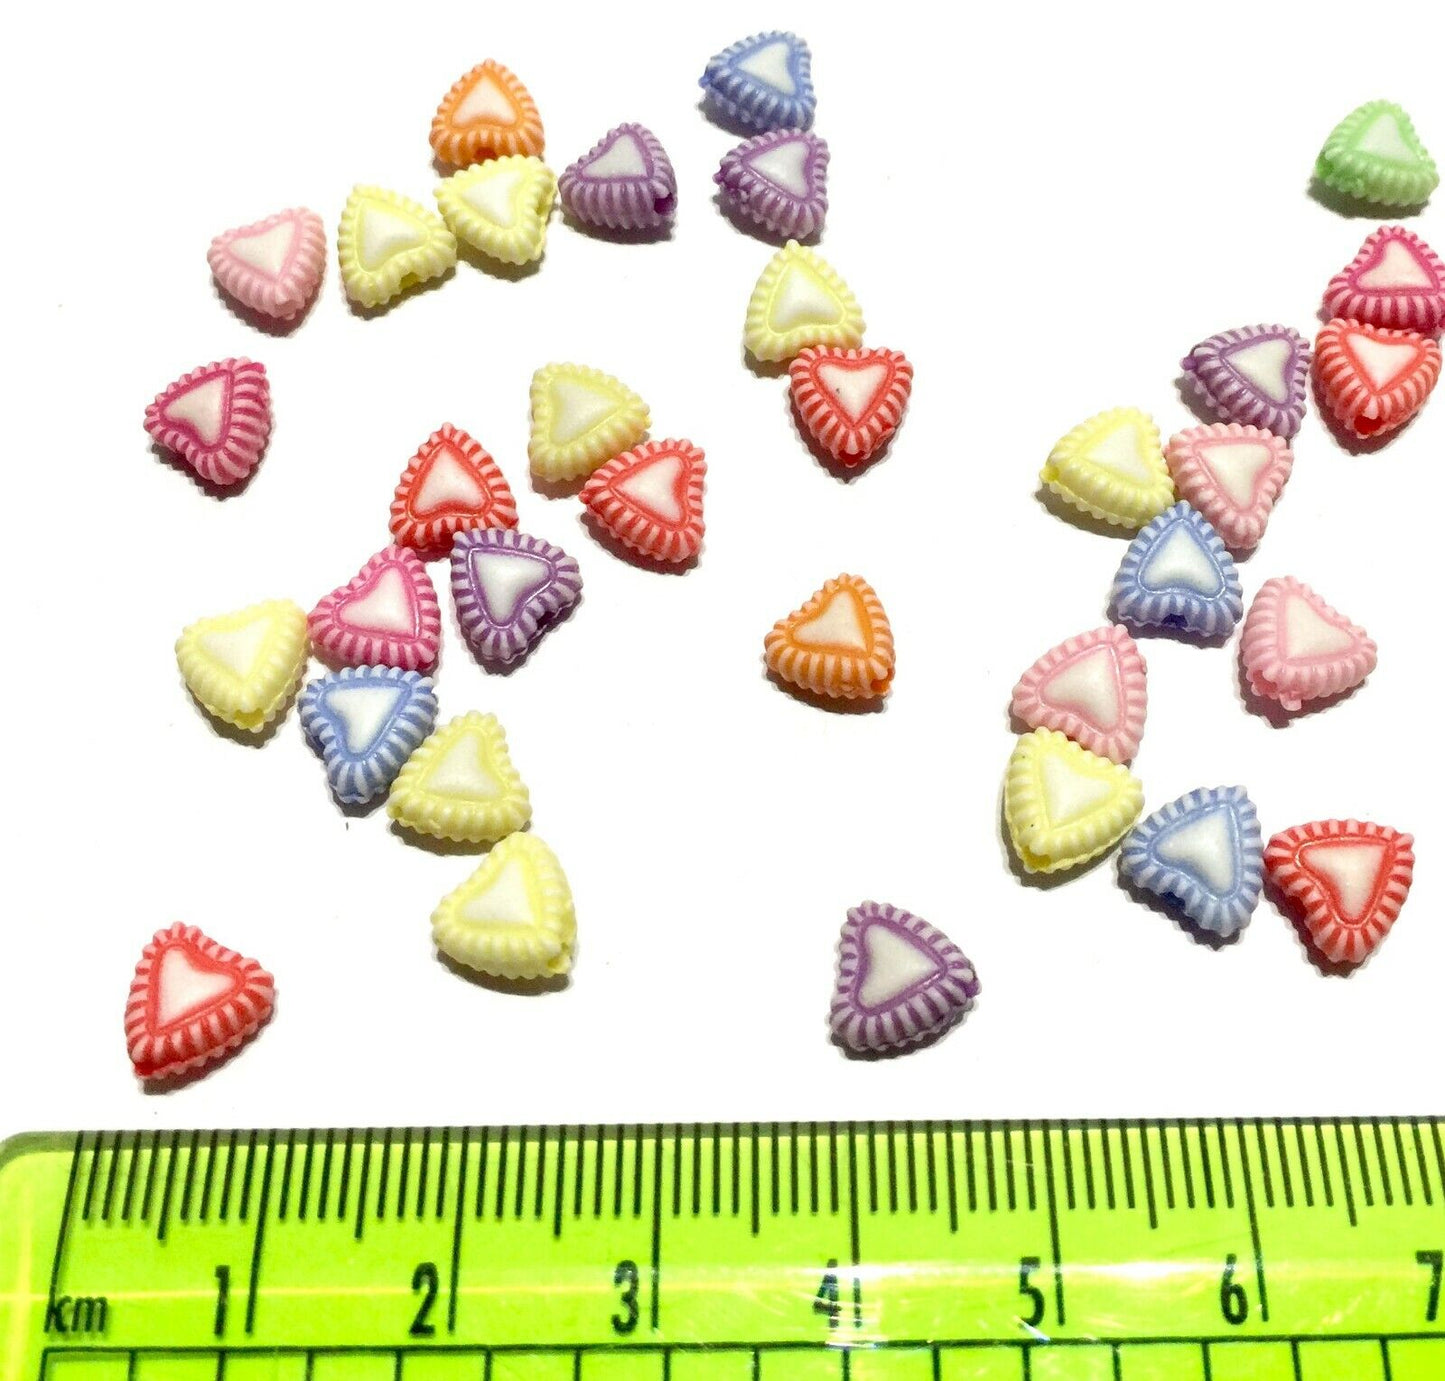 100x Heart Shape and Heart Design Acrylic Spacer Beads - Pick Your Style